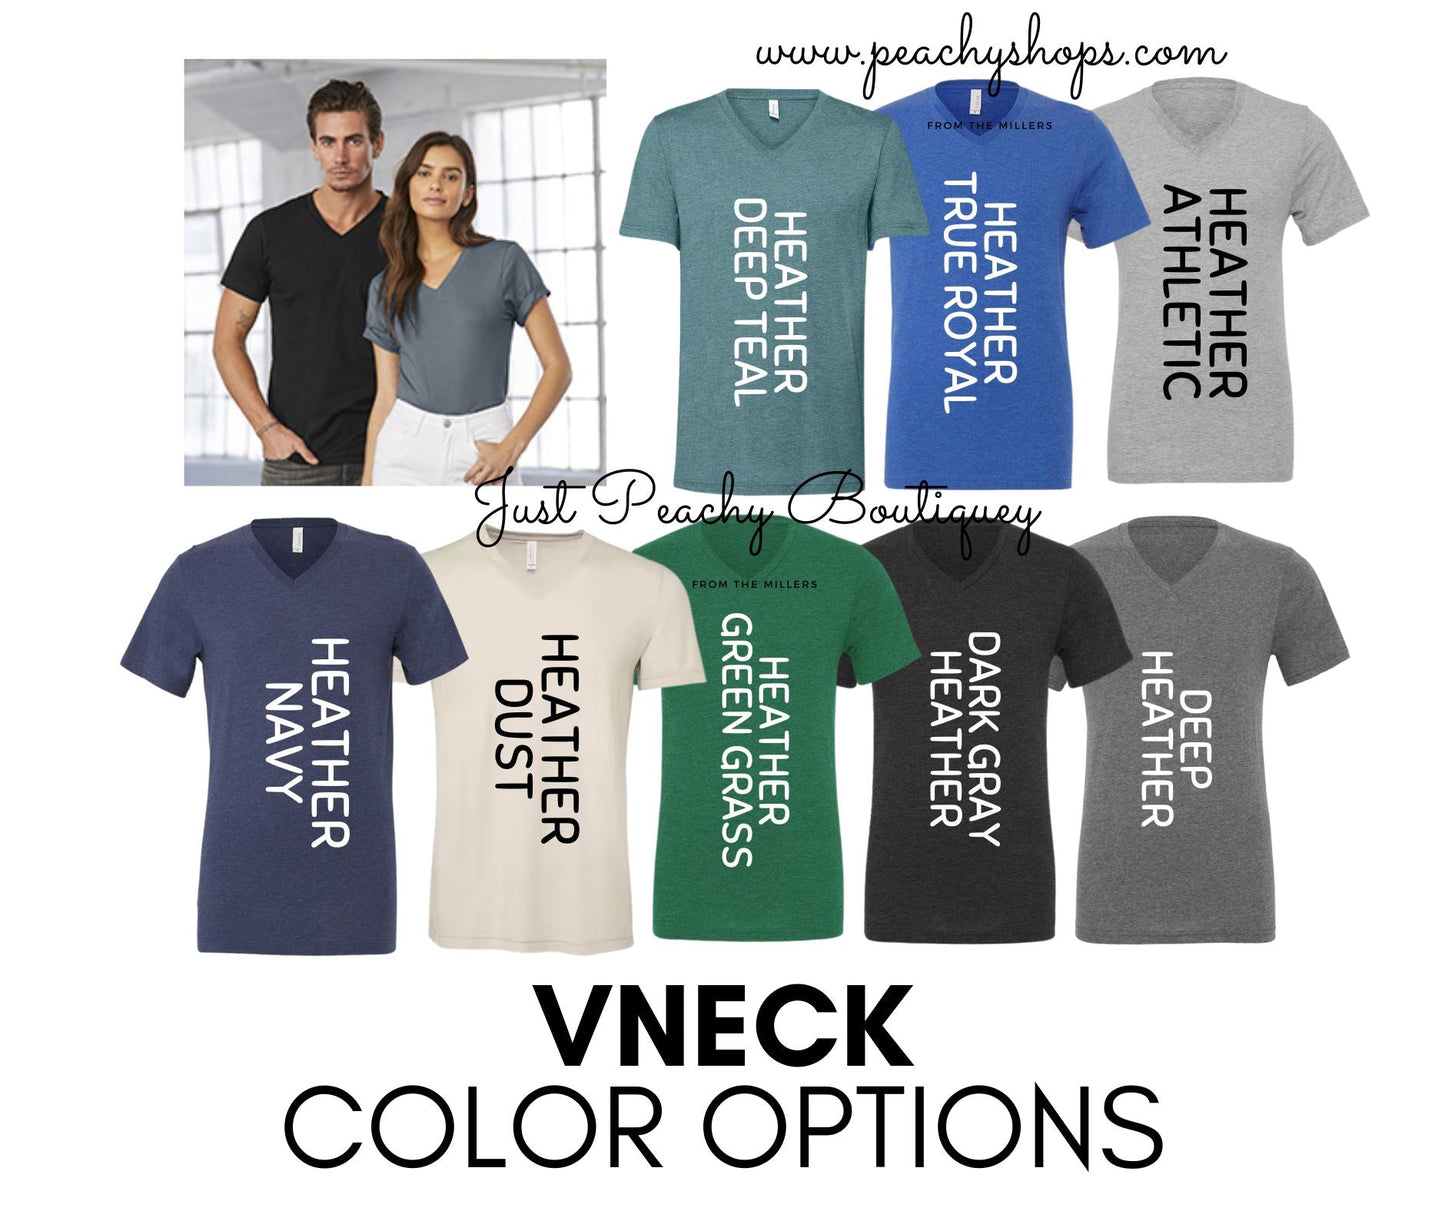 SNOW DAY ENTHUSIAST T-SHIRT OR PICK FROM 200 COLOR & STYLE OPTIONS! - TAT 4-7 DAYS